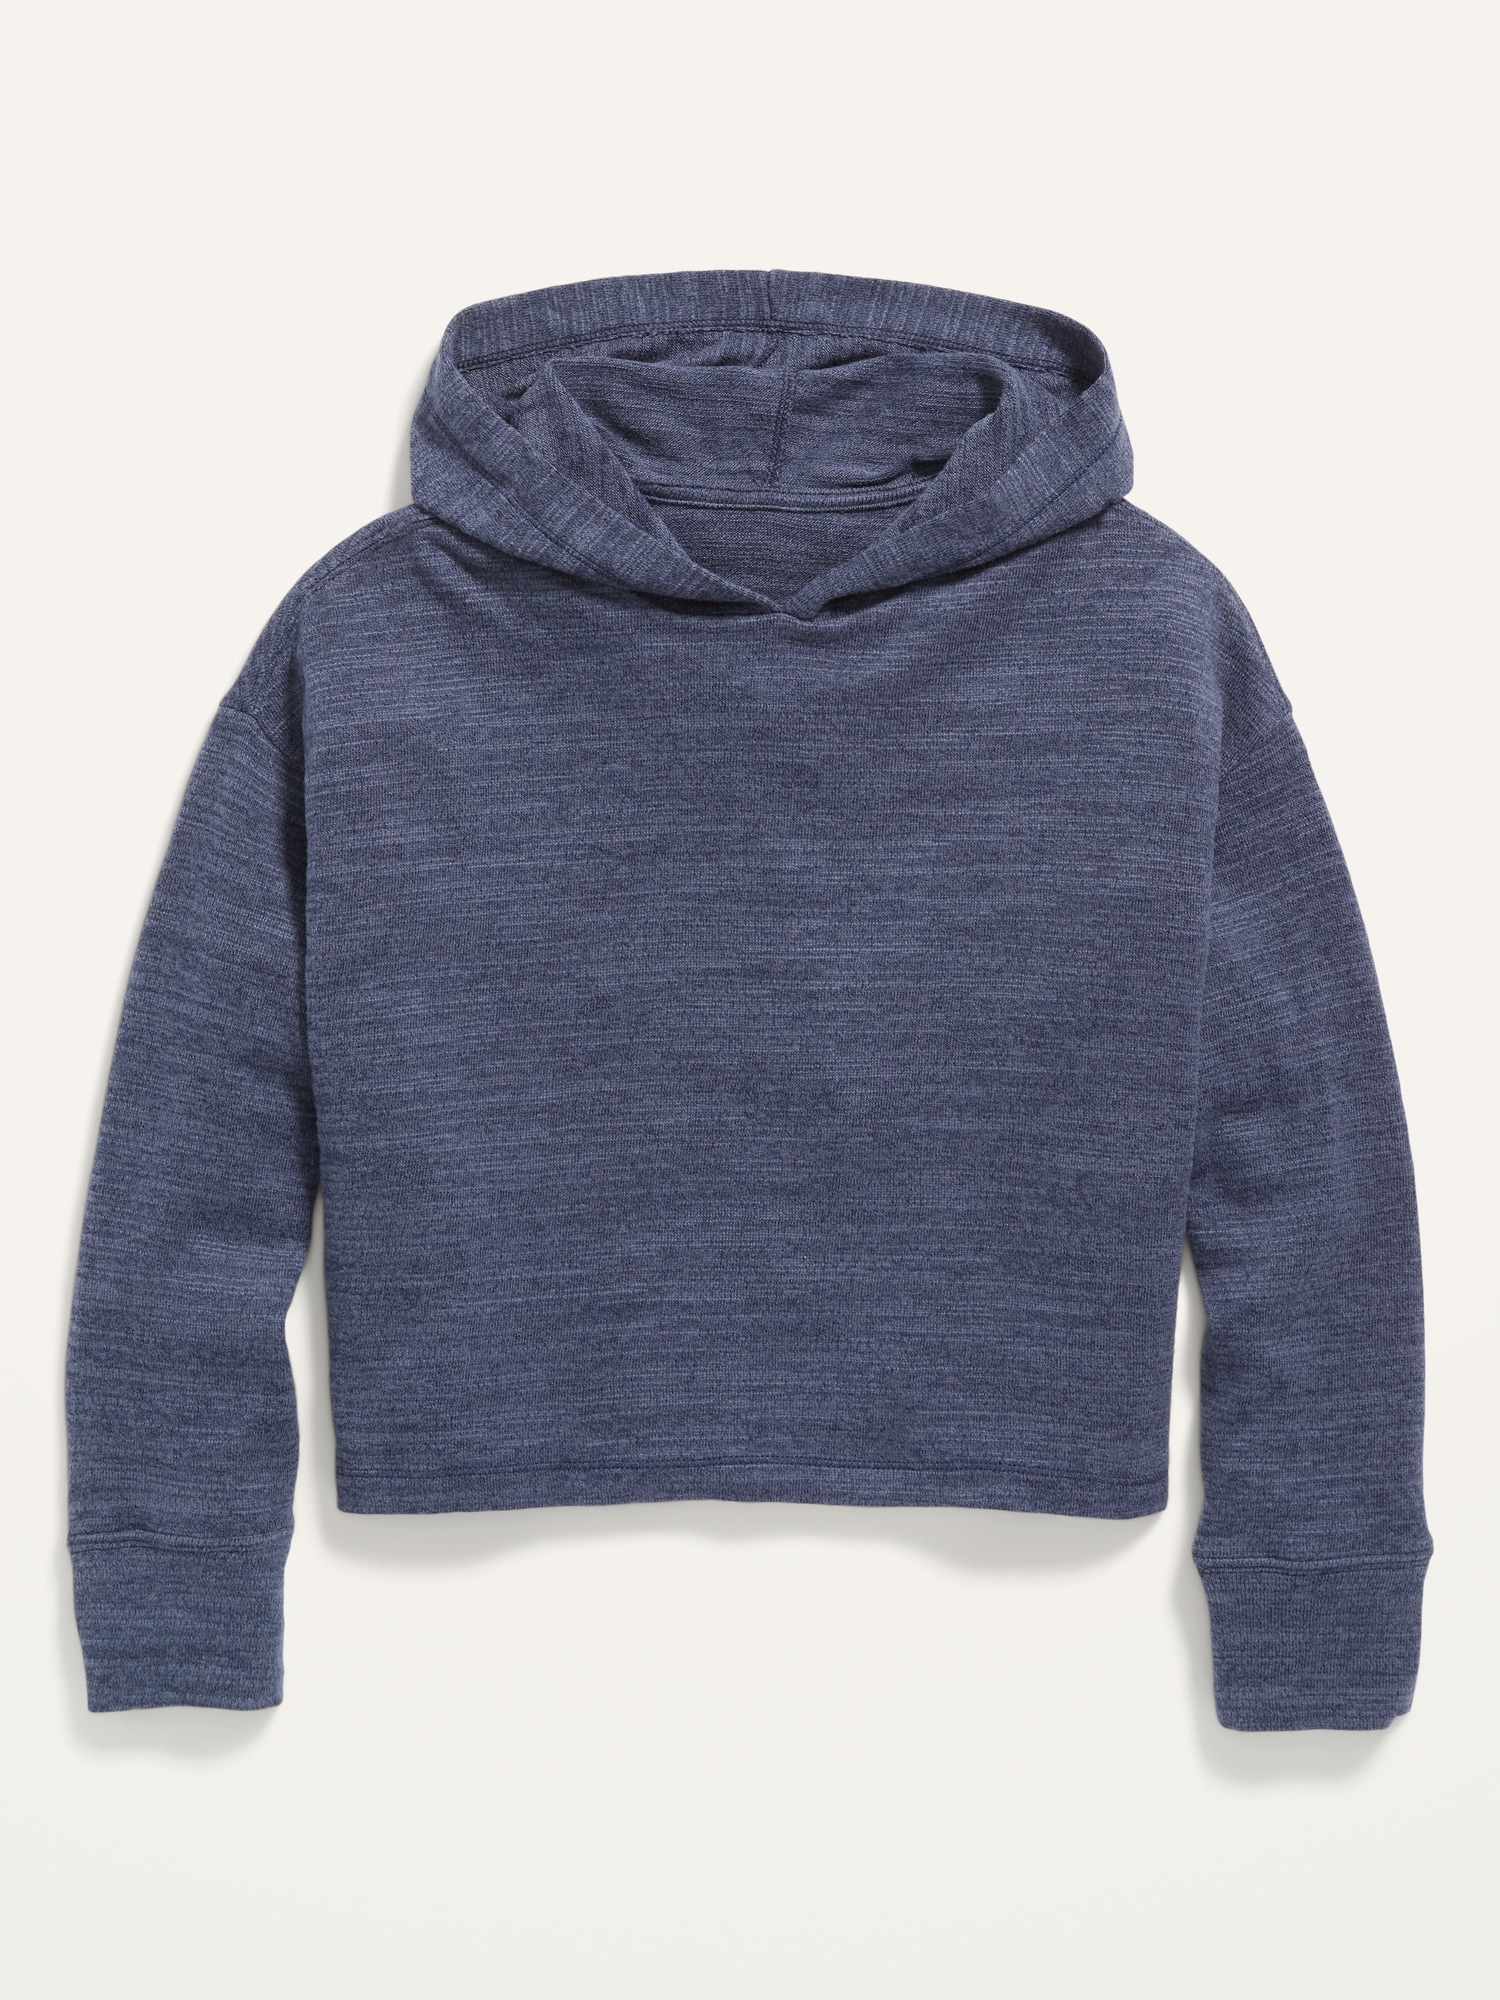 Slub-Knit Cropped Pullover Hoodie for Girls